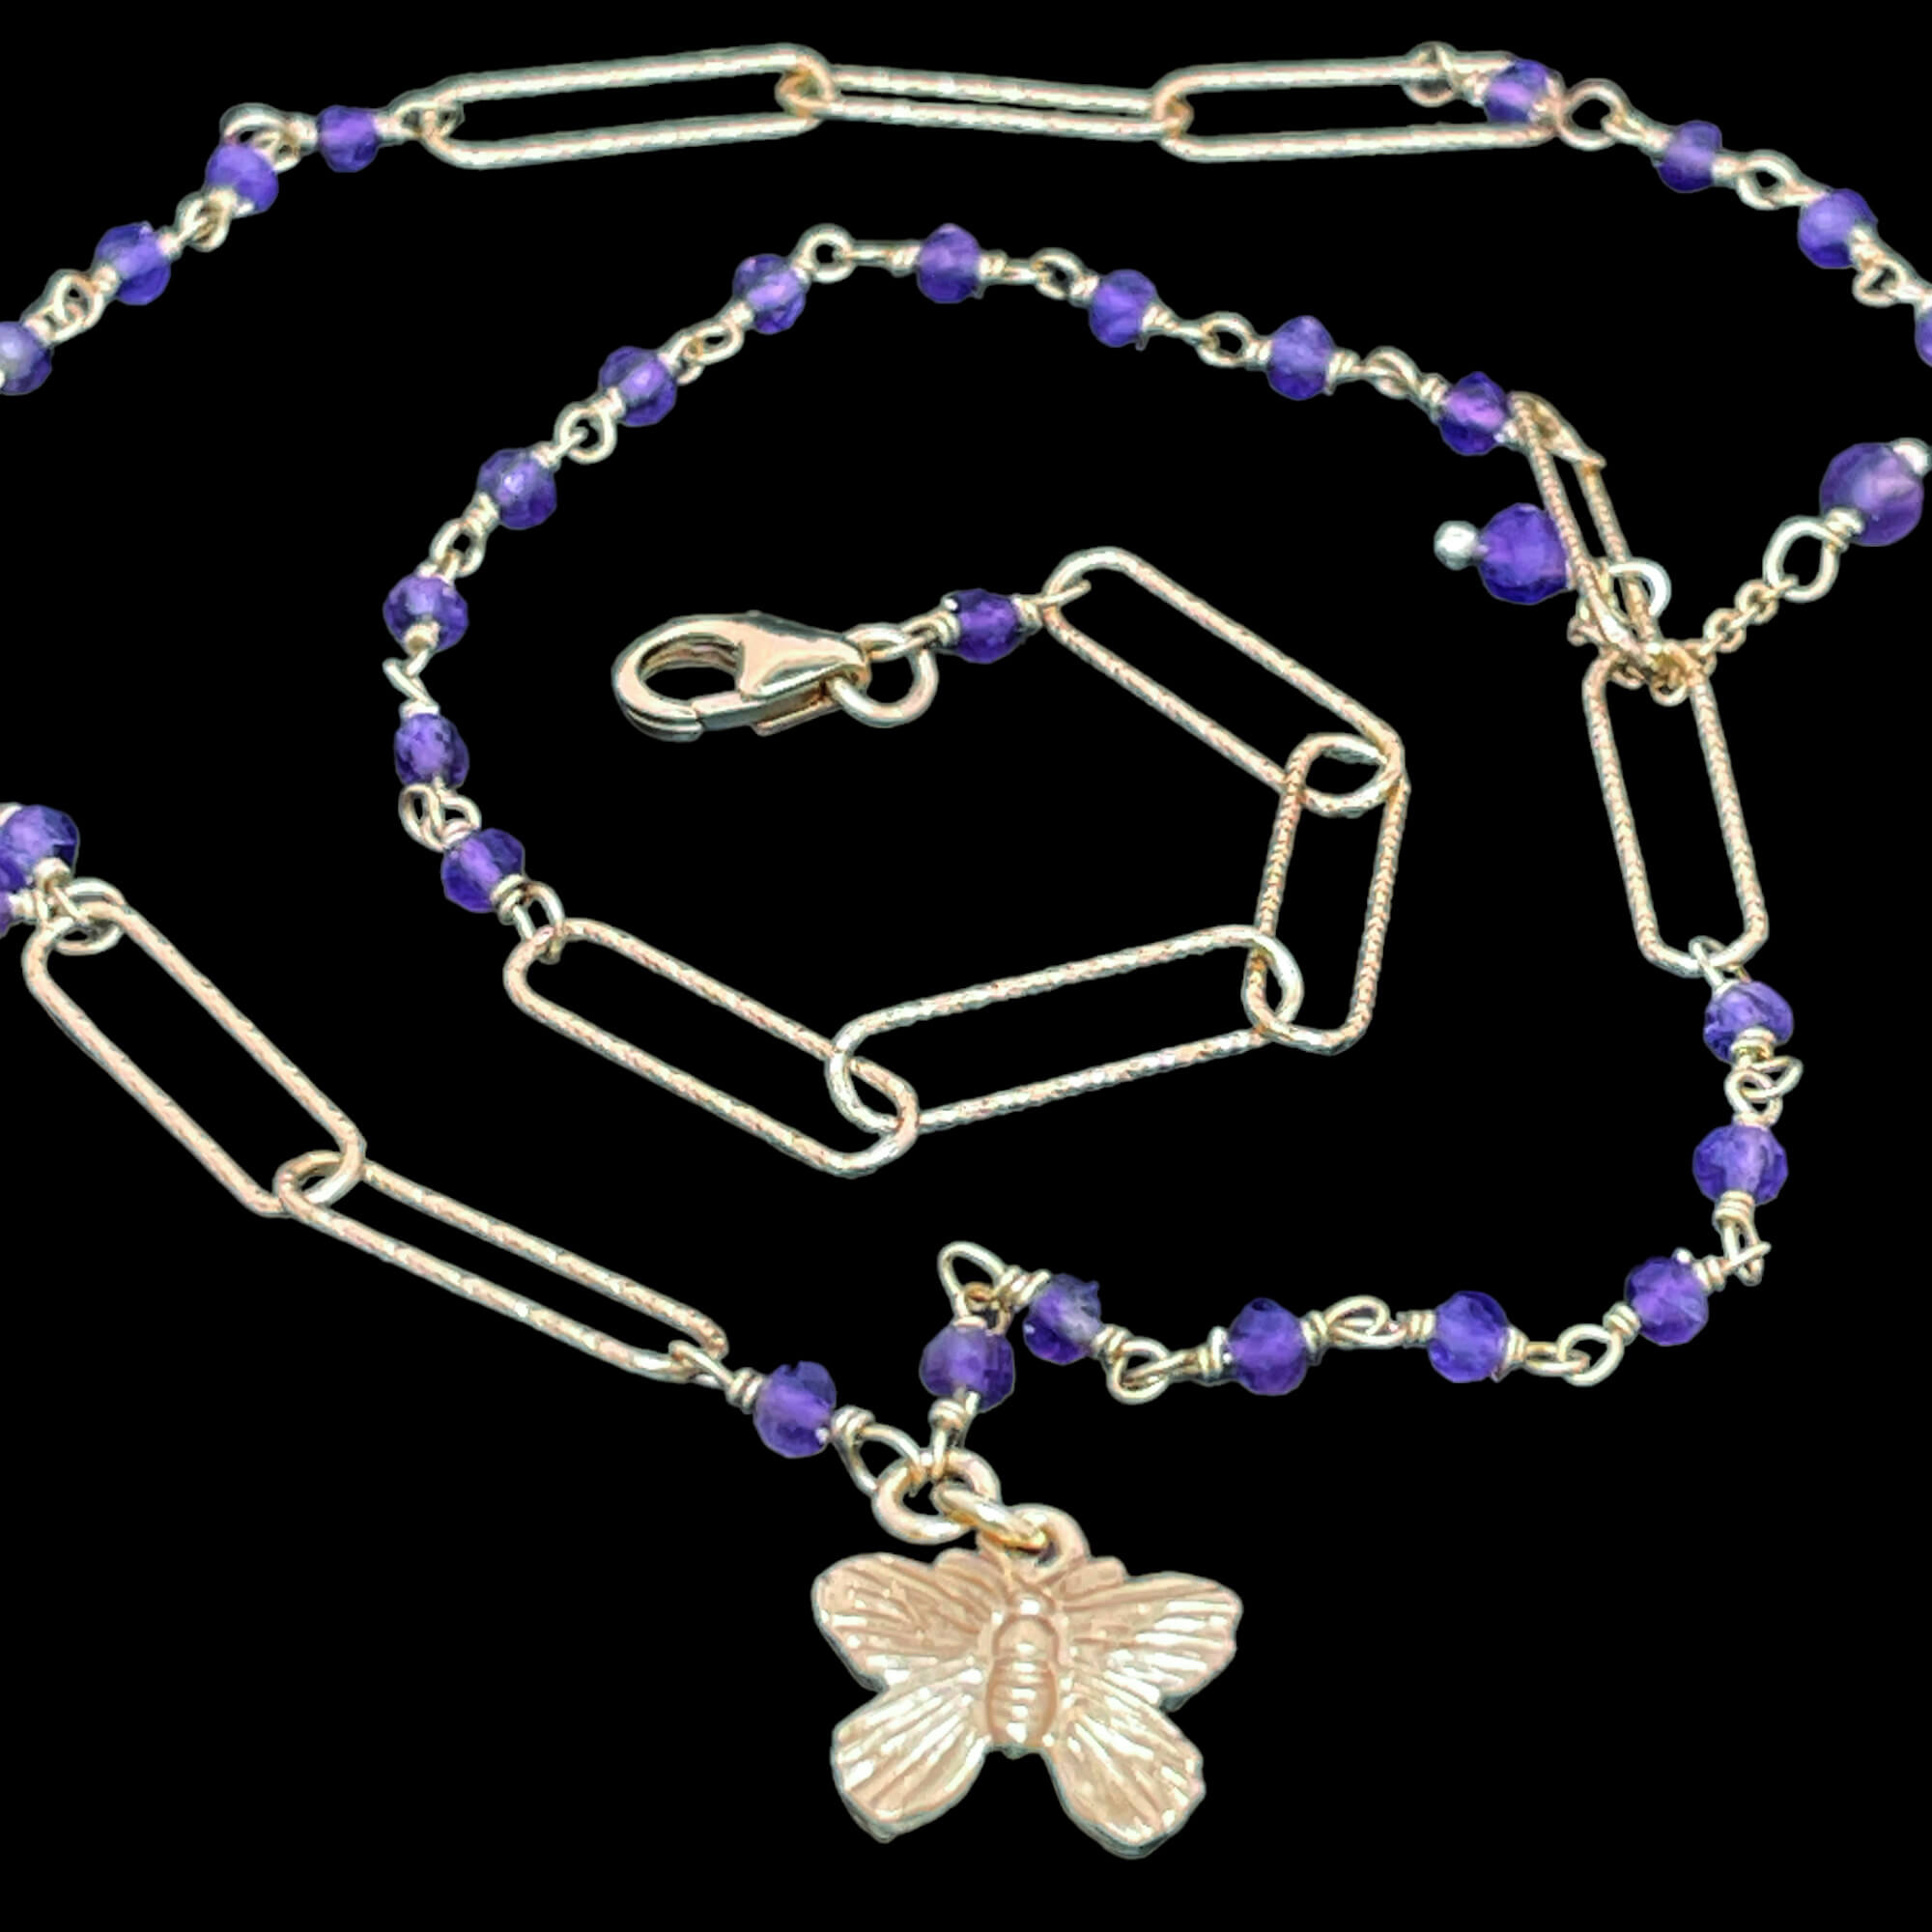 Gold-plated necklace with amethyst stones and a butterfly